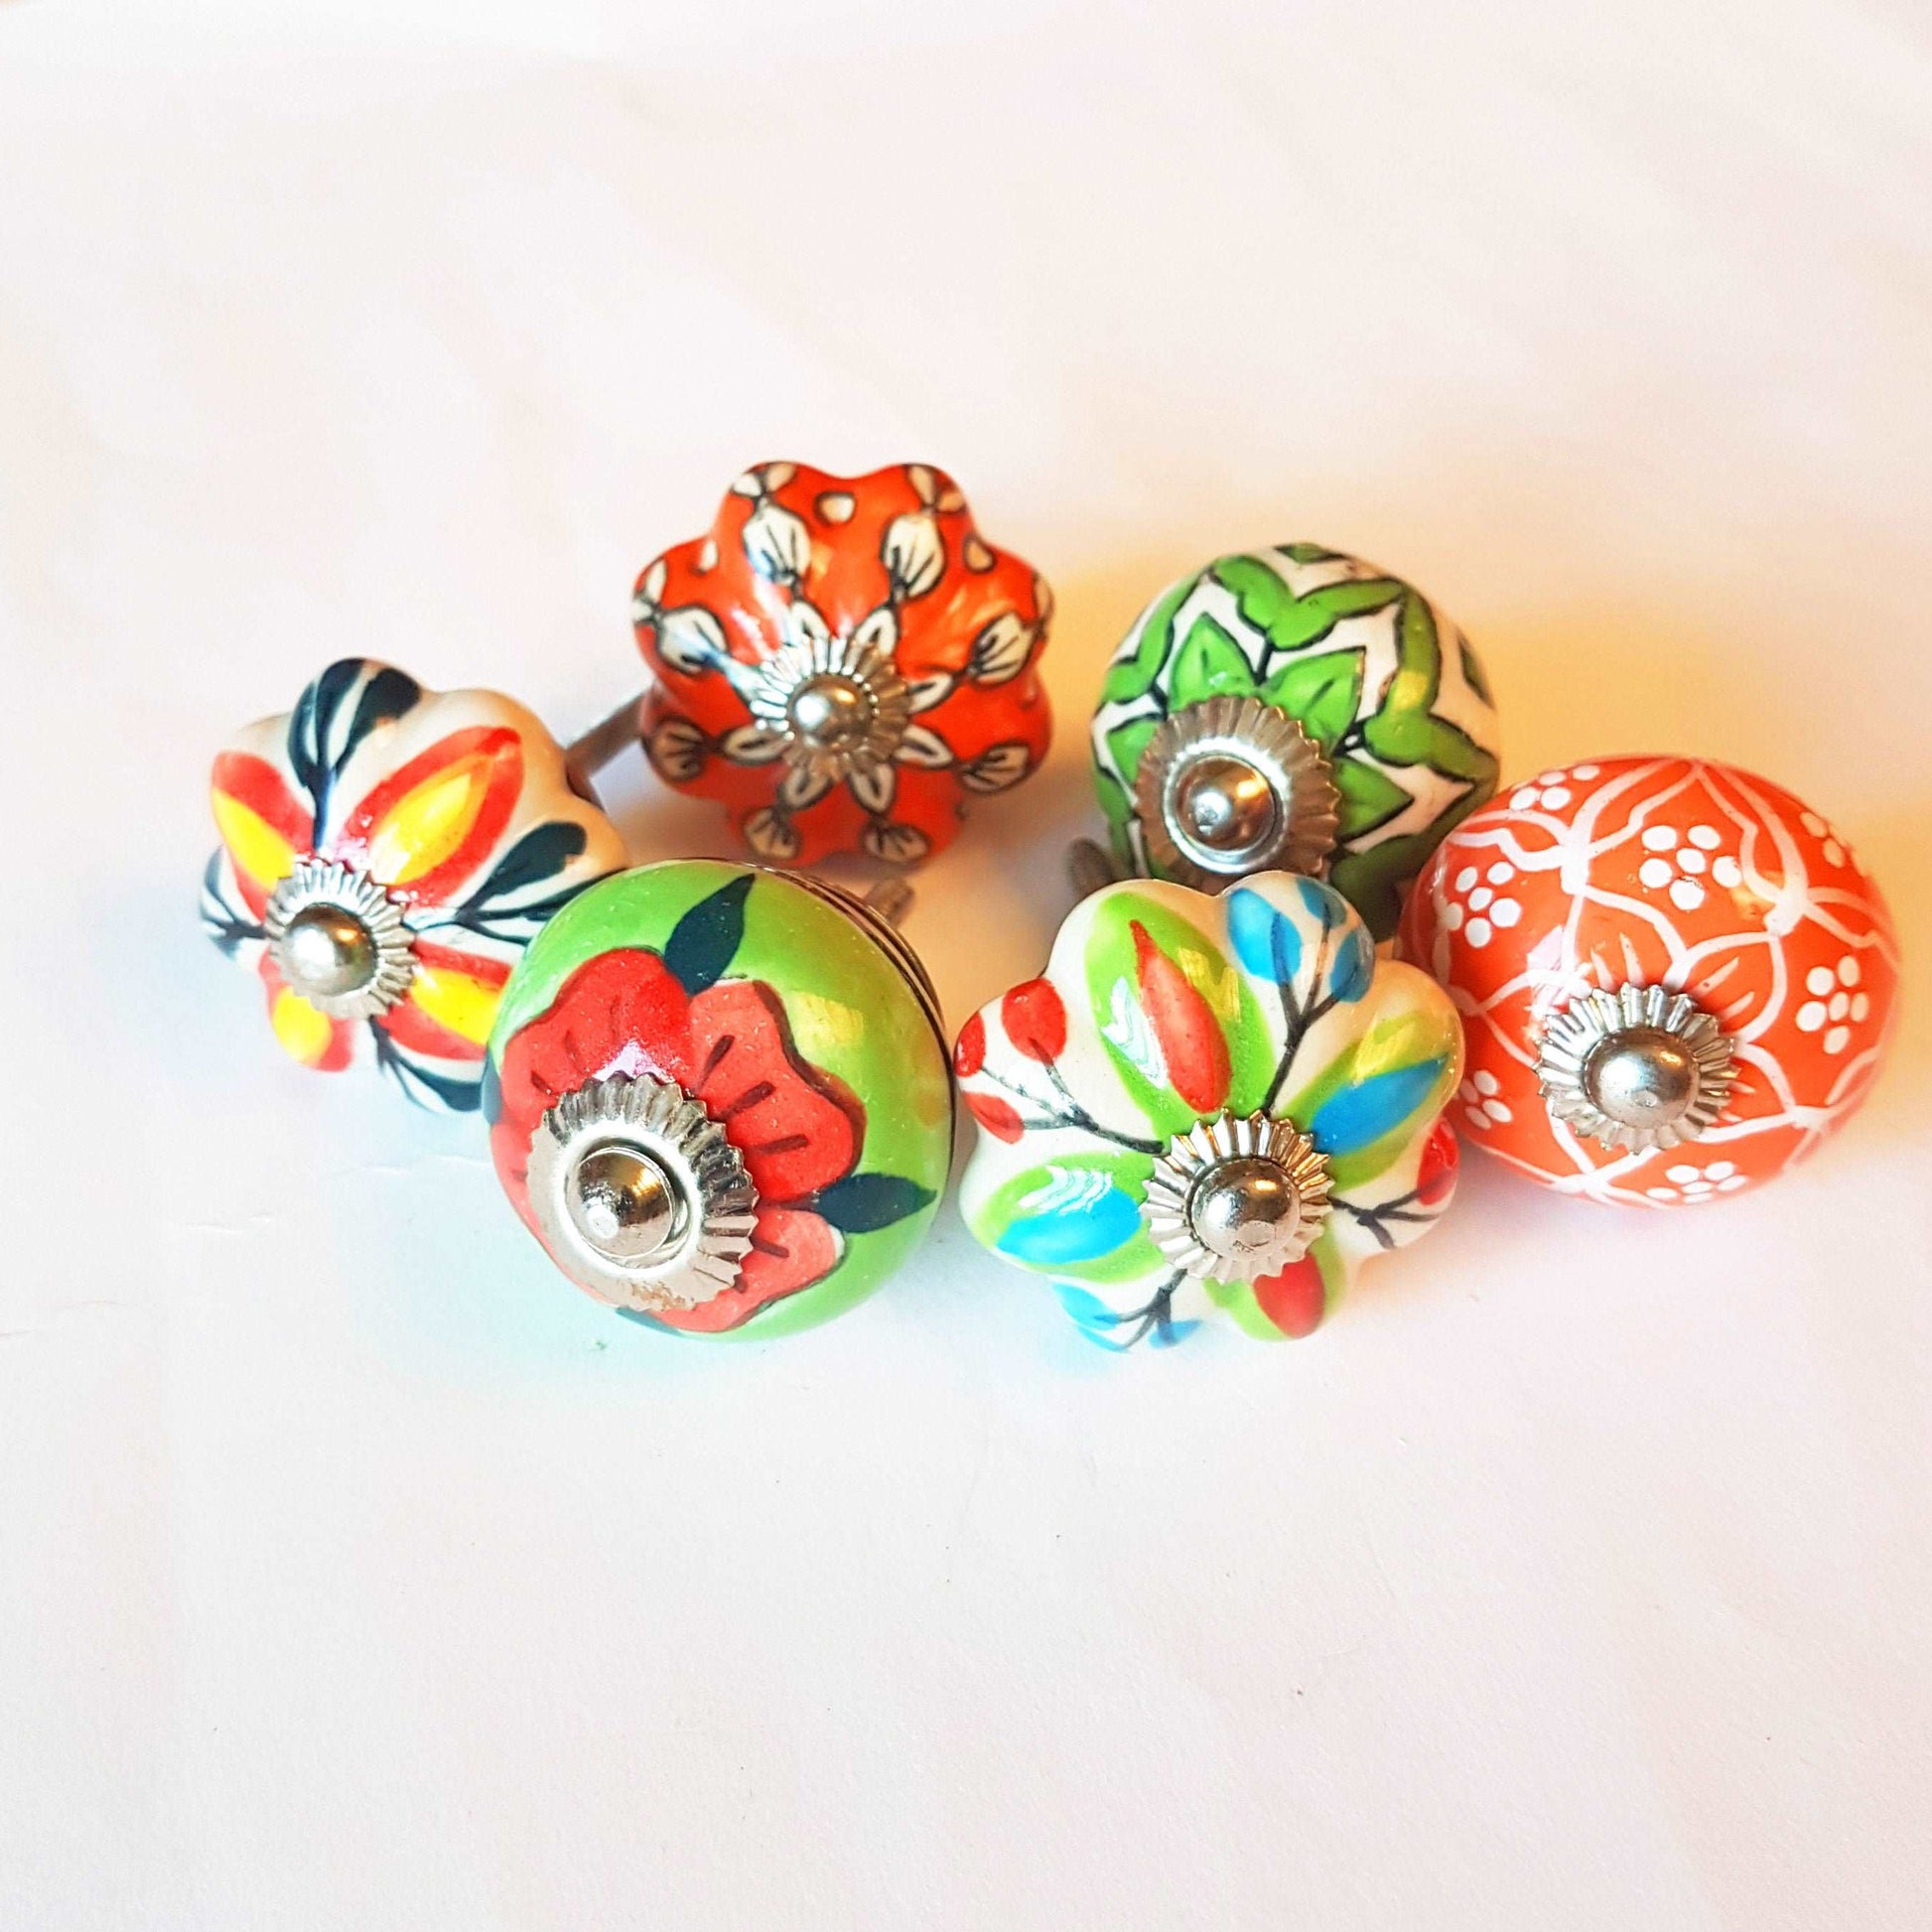 6 cabinet knobs Dolce exclusive collection. Hand painted floral ceramic art. Drawer pulls. one and one half inches in diameter - Vintage India Ca